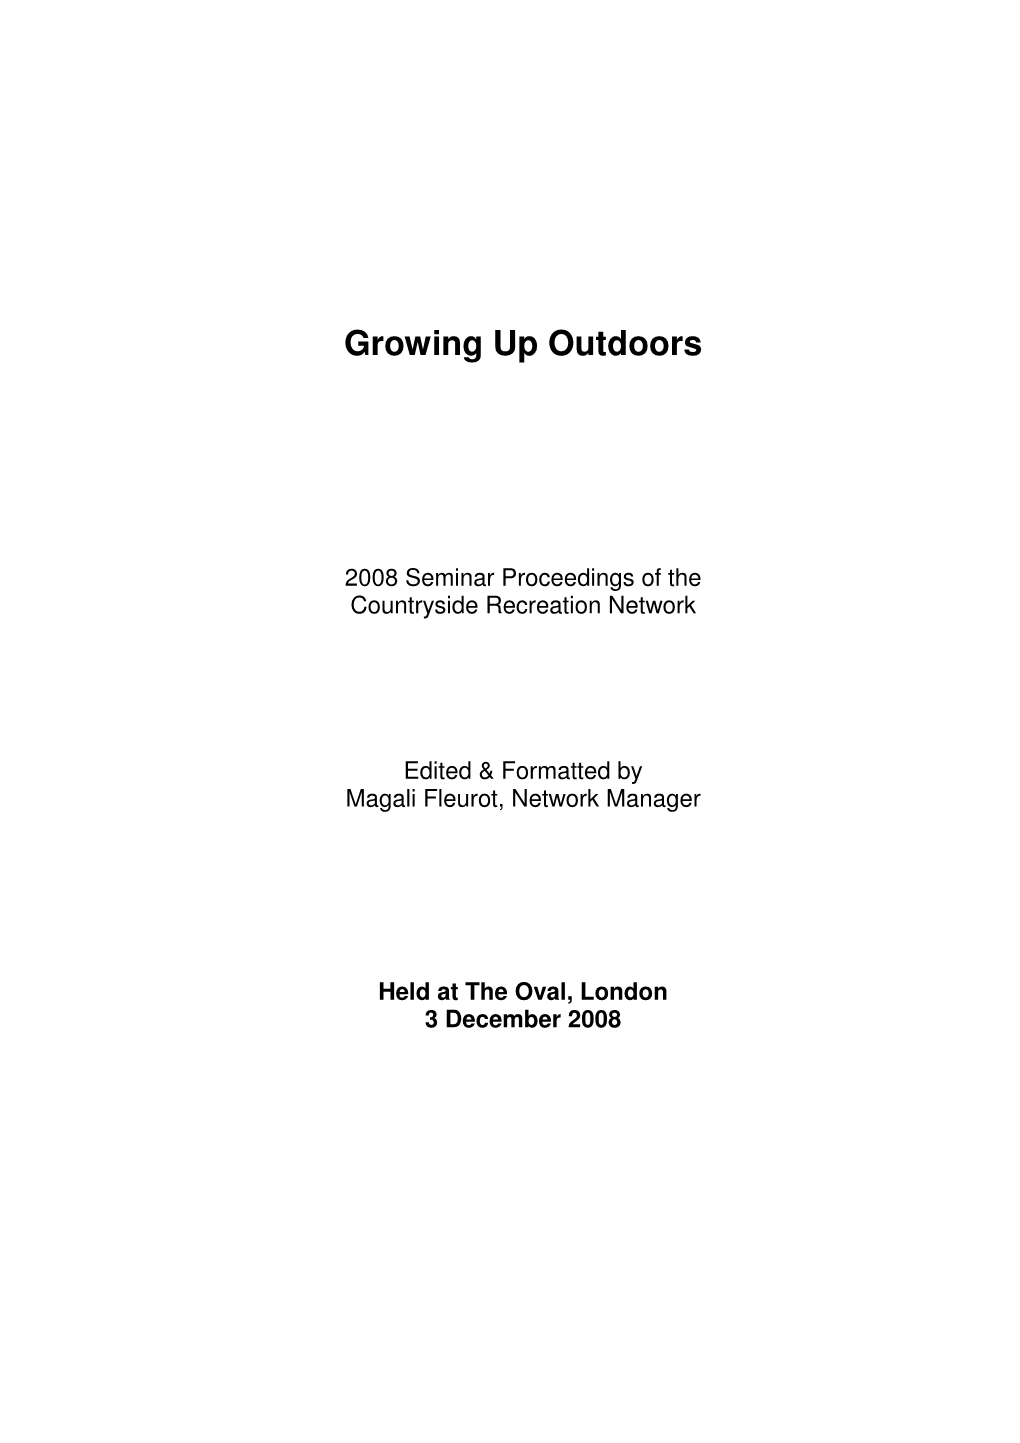 Growing up Outdoors